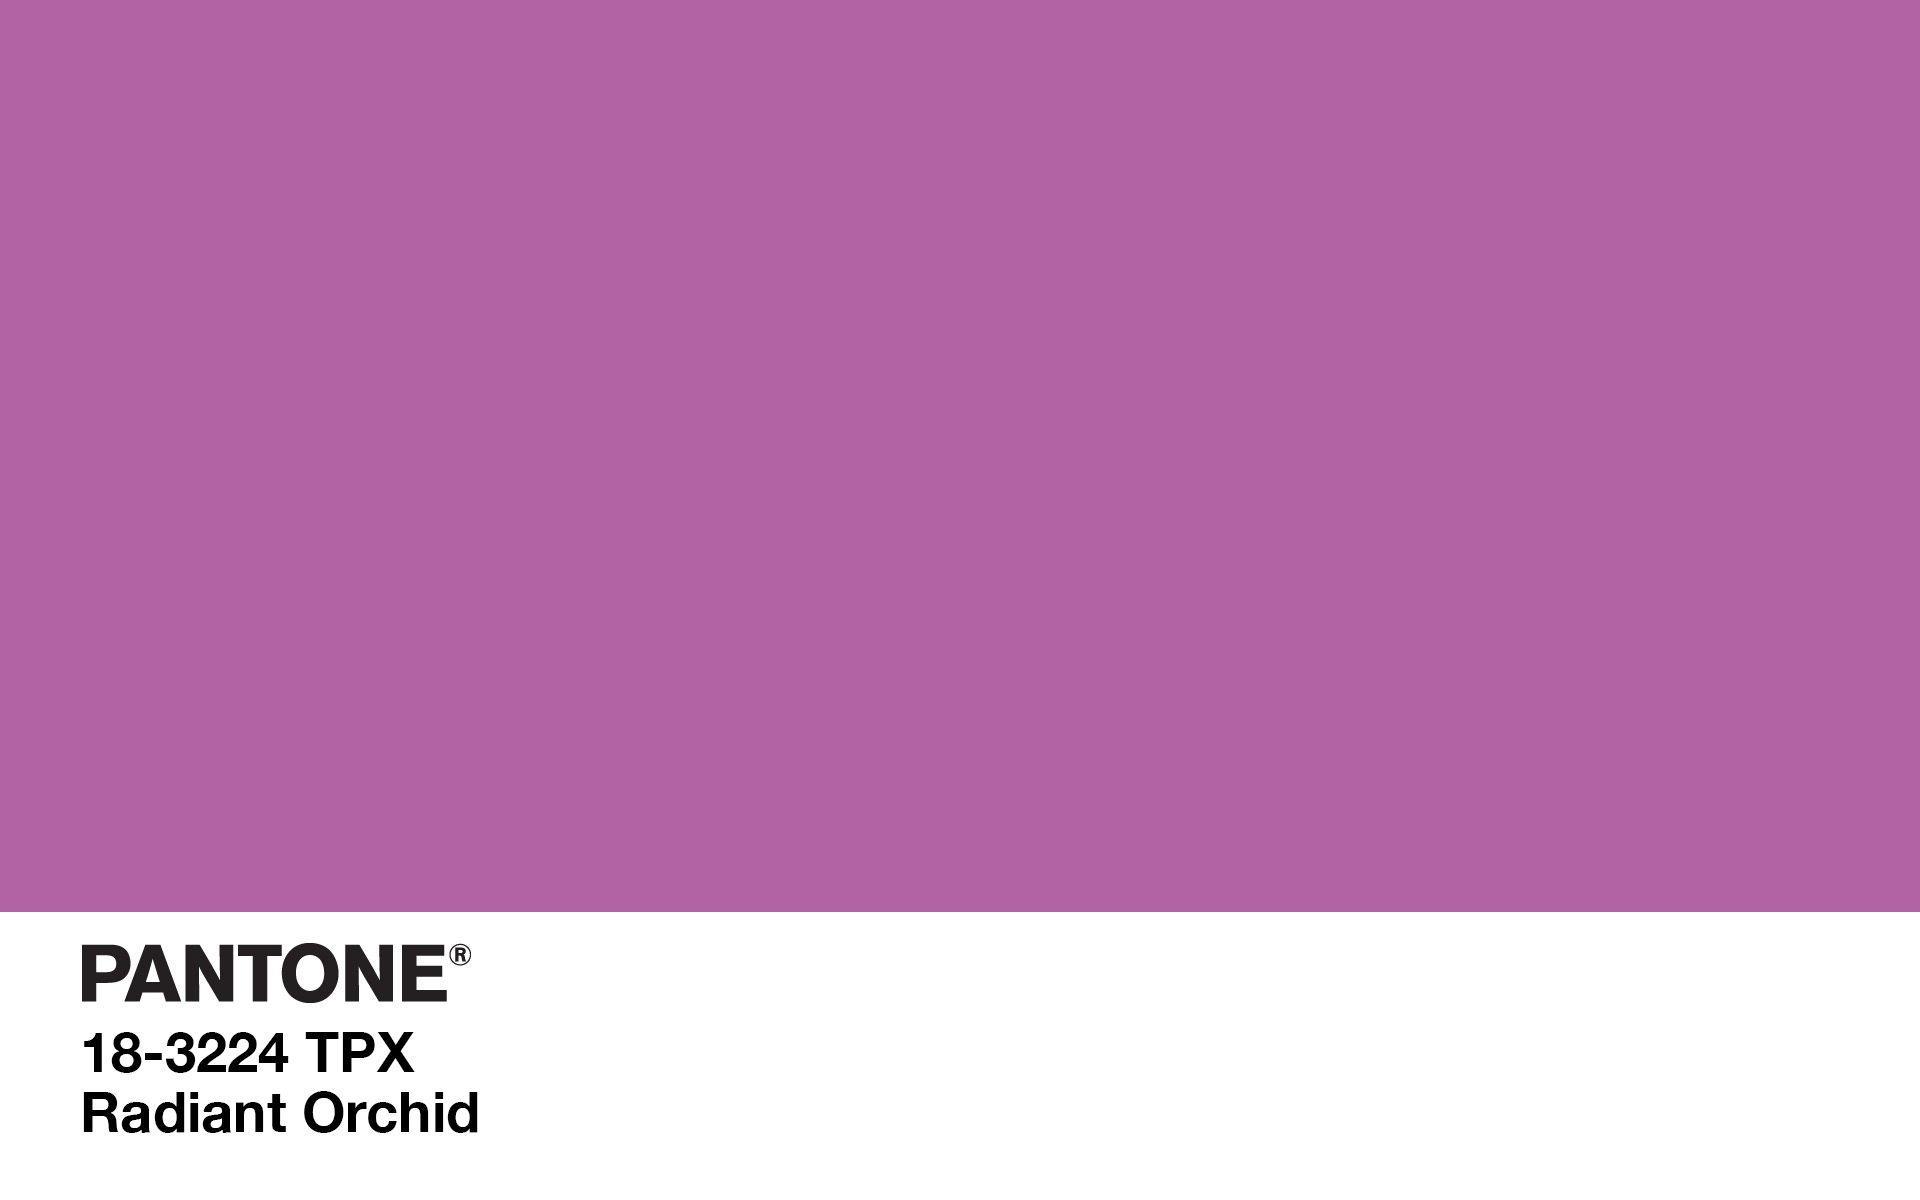 Pantone Colour of the Year: The 21st Century.